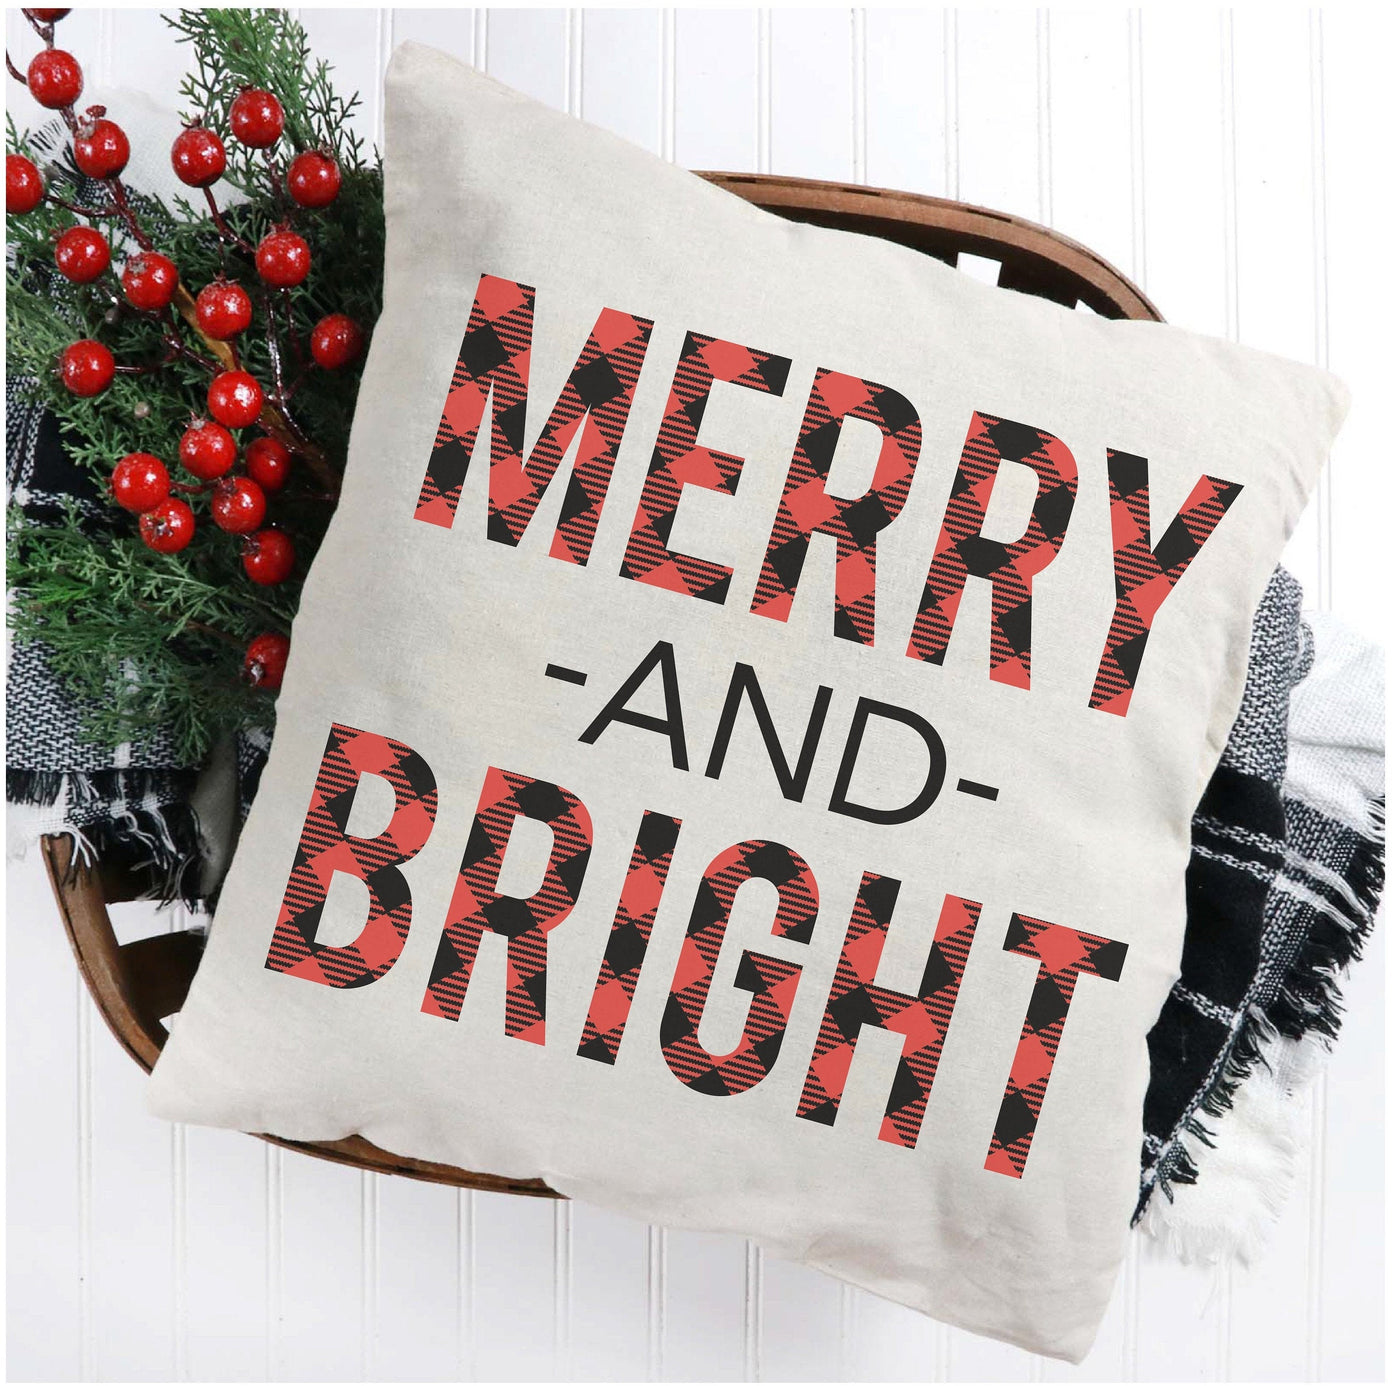 Merry and Bright Christmas 16x16 Throw Pillow